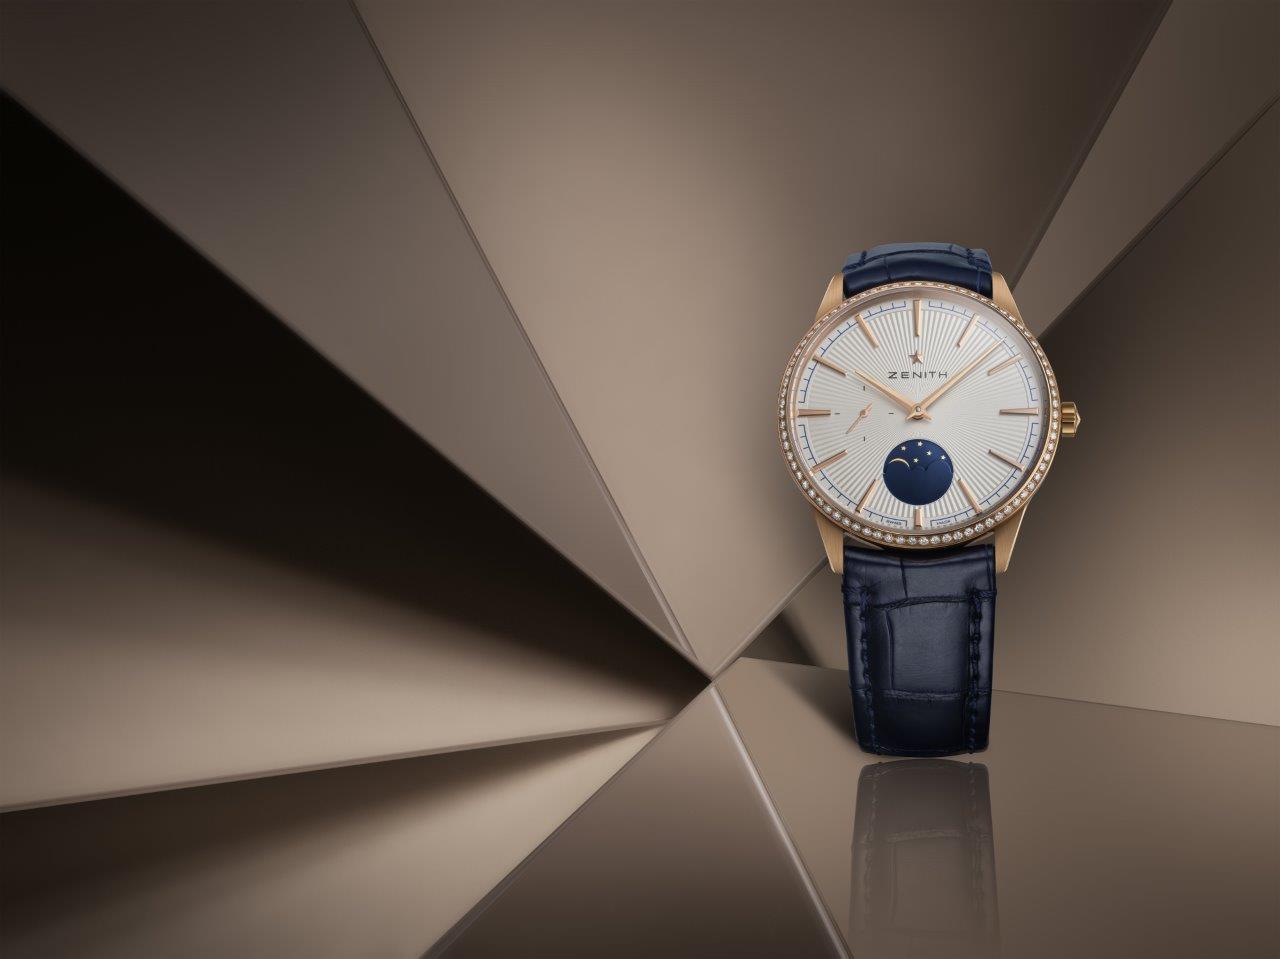 Zenith puts ladies first for phase one of its 2020 watch roll-outs